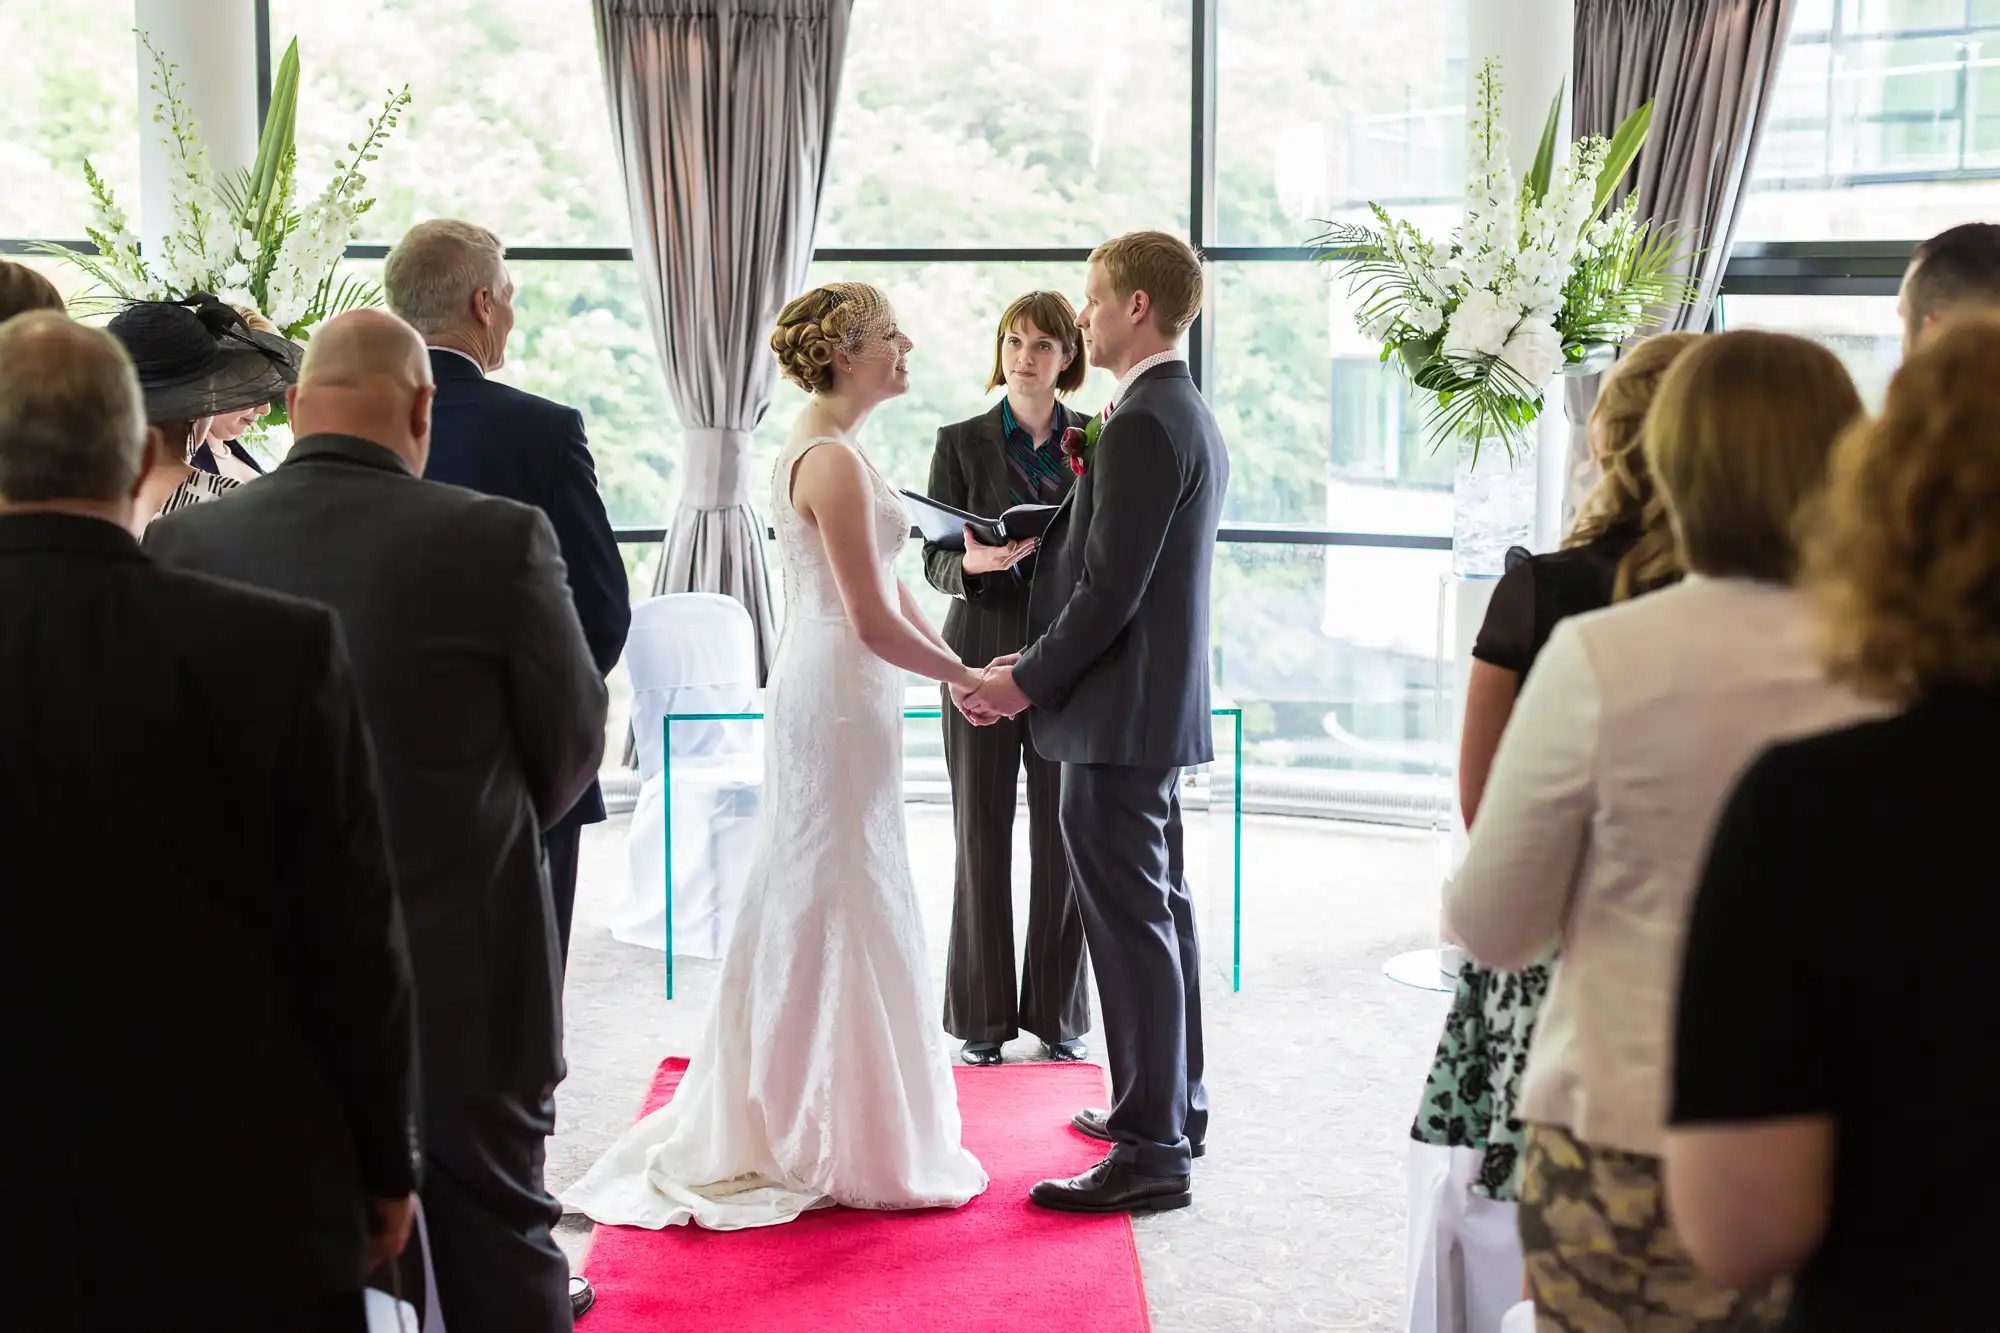 A bride and groom exchange vows at a wedding ceremony indoors, surrounded by guests and decorated with tall floral arrangements.